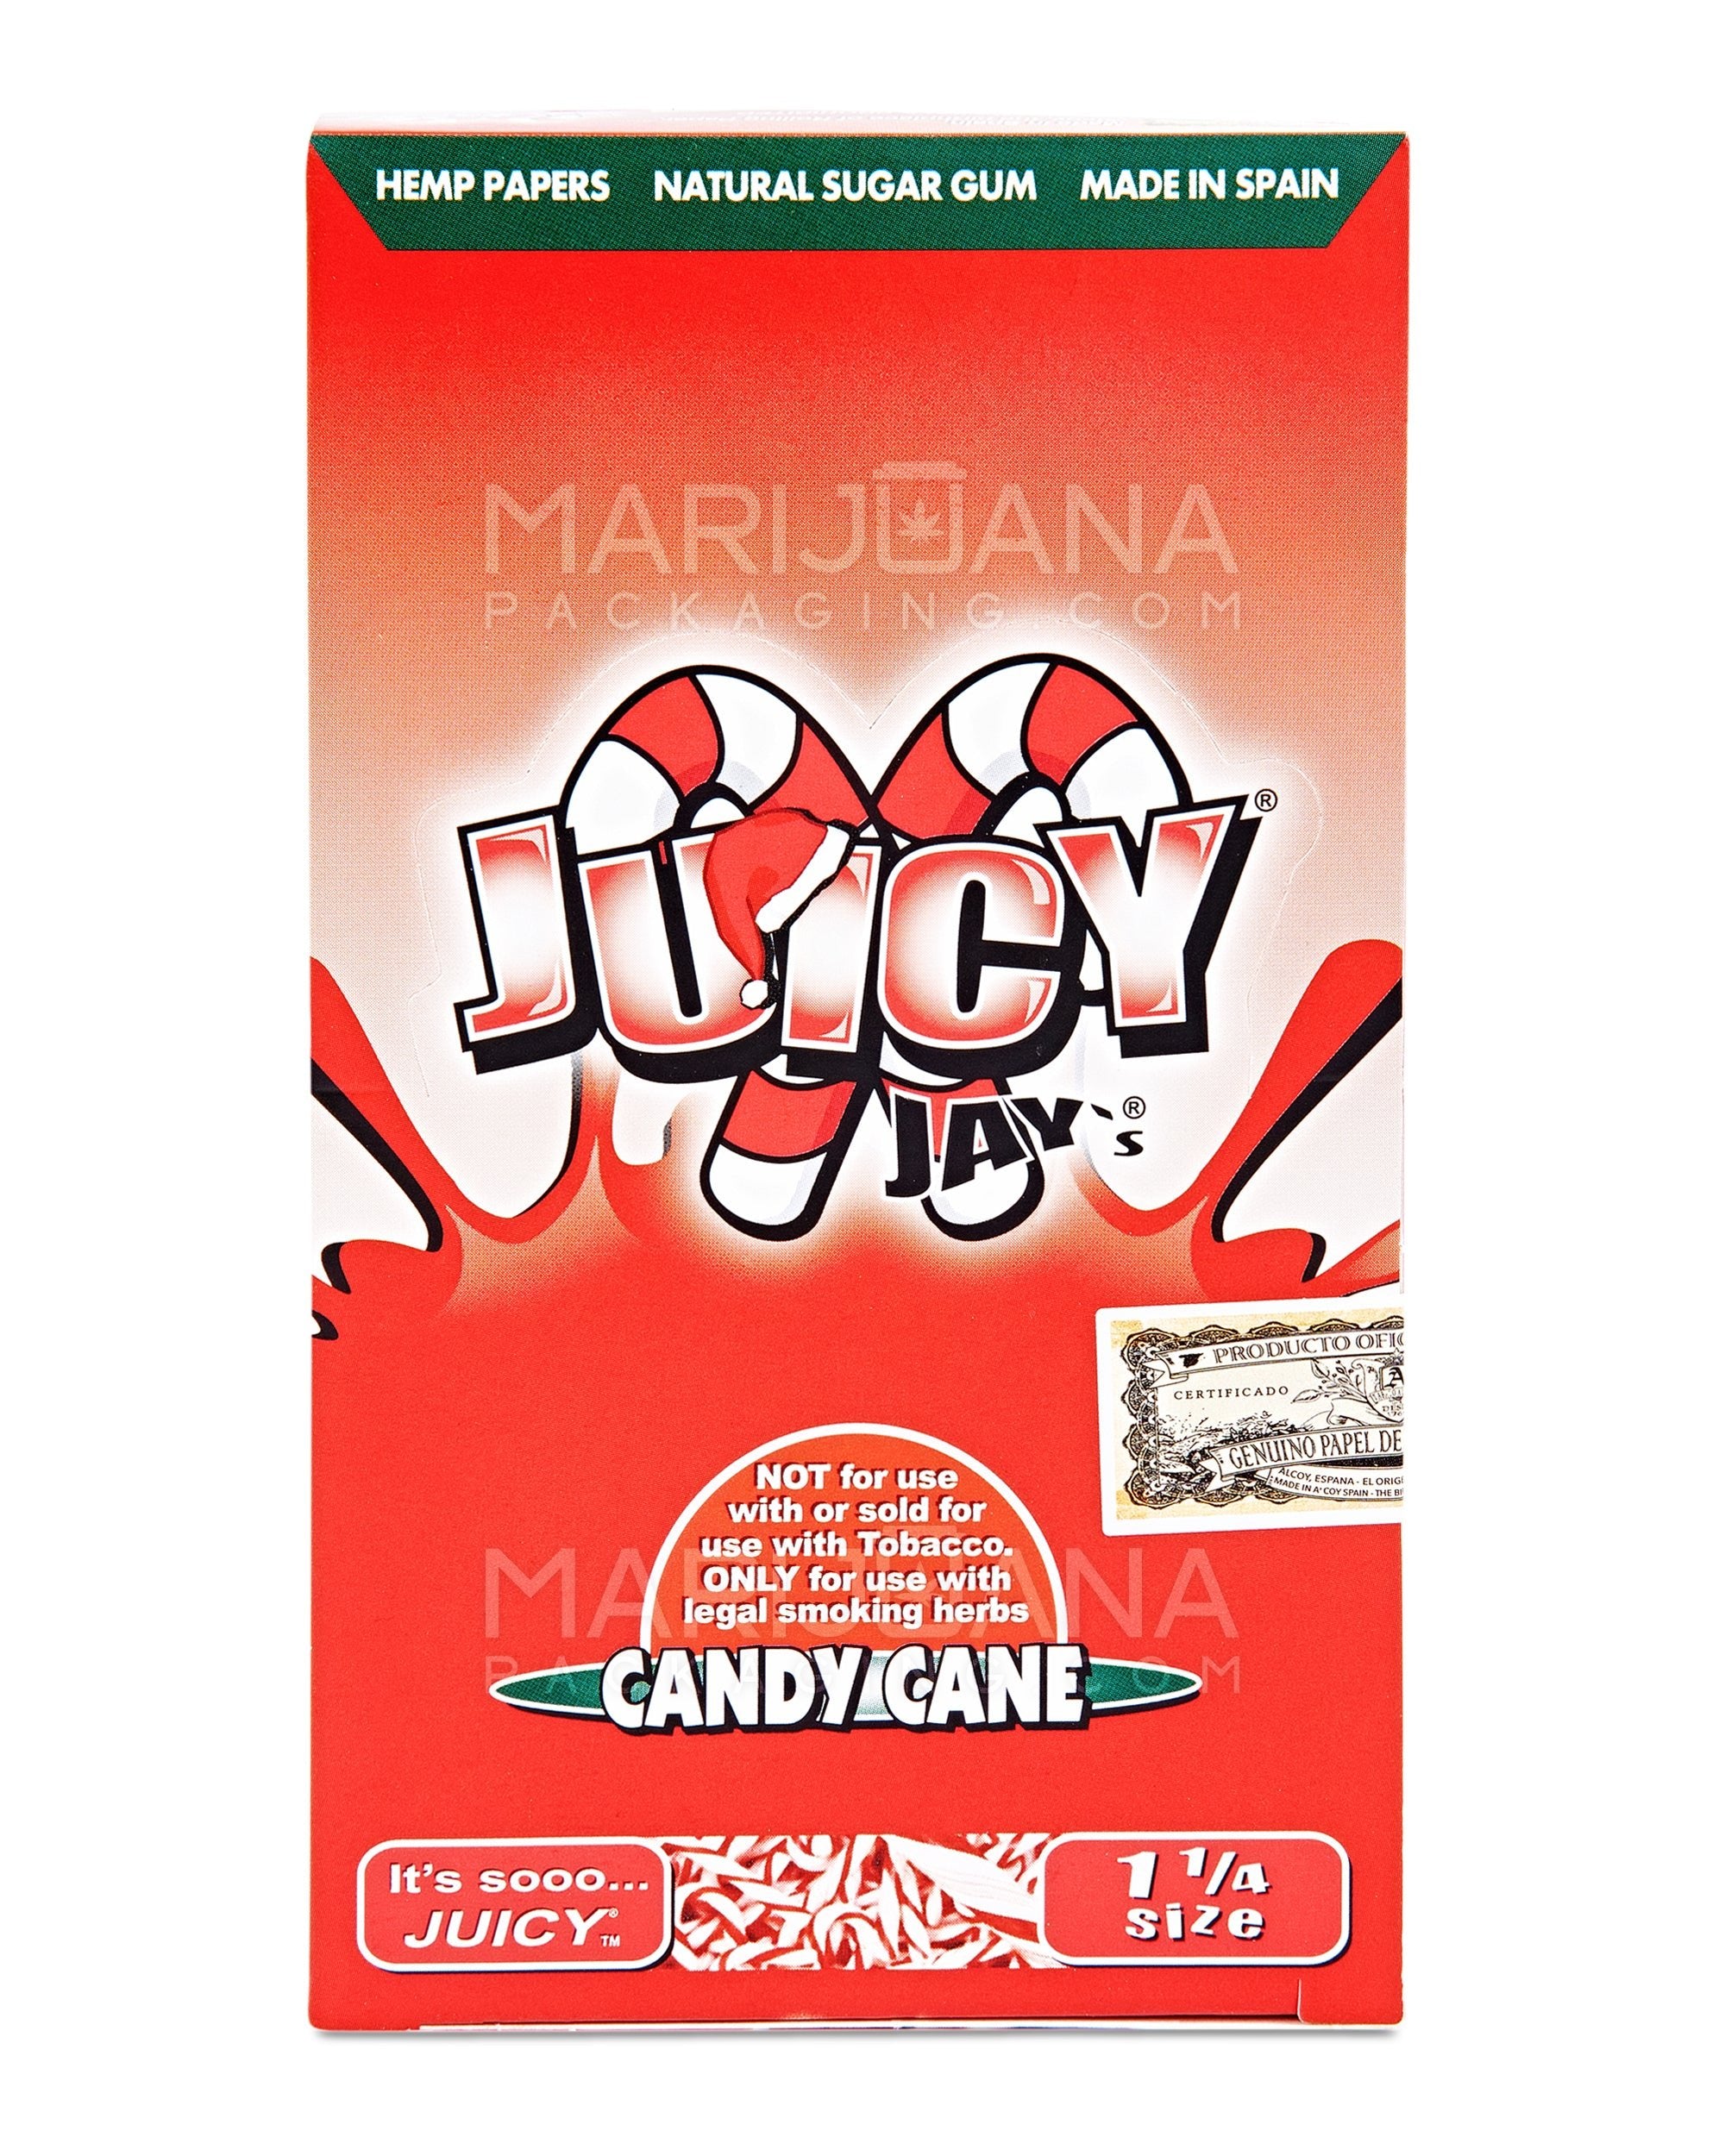 JUICY JAY'S | 'Retail Display' 1 1/4 Size Hemp Rolling Papers | 76mm - Candy Cane - 24 Count - 4